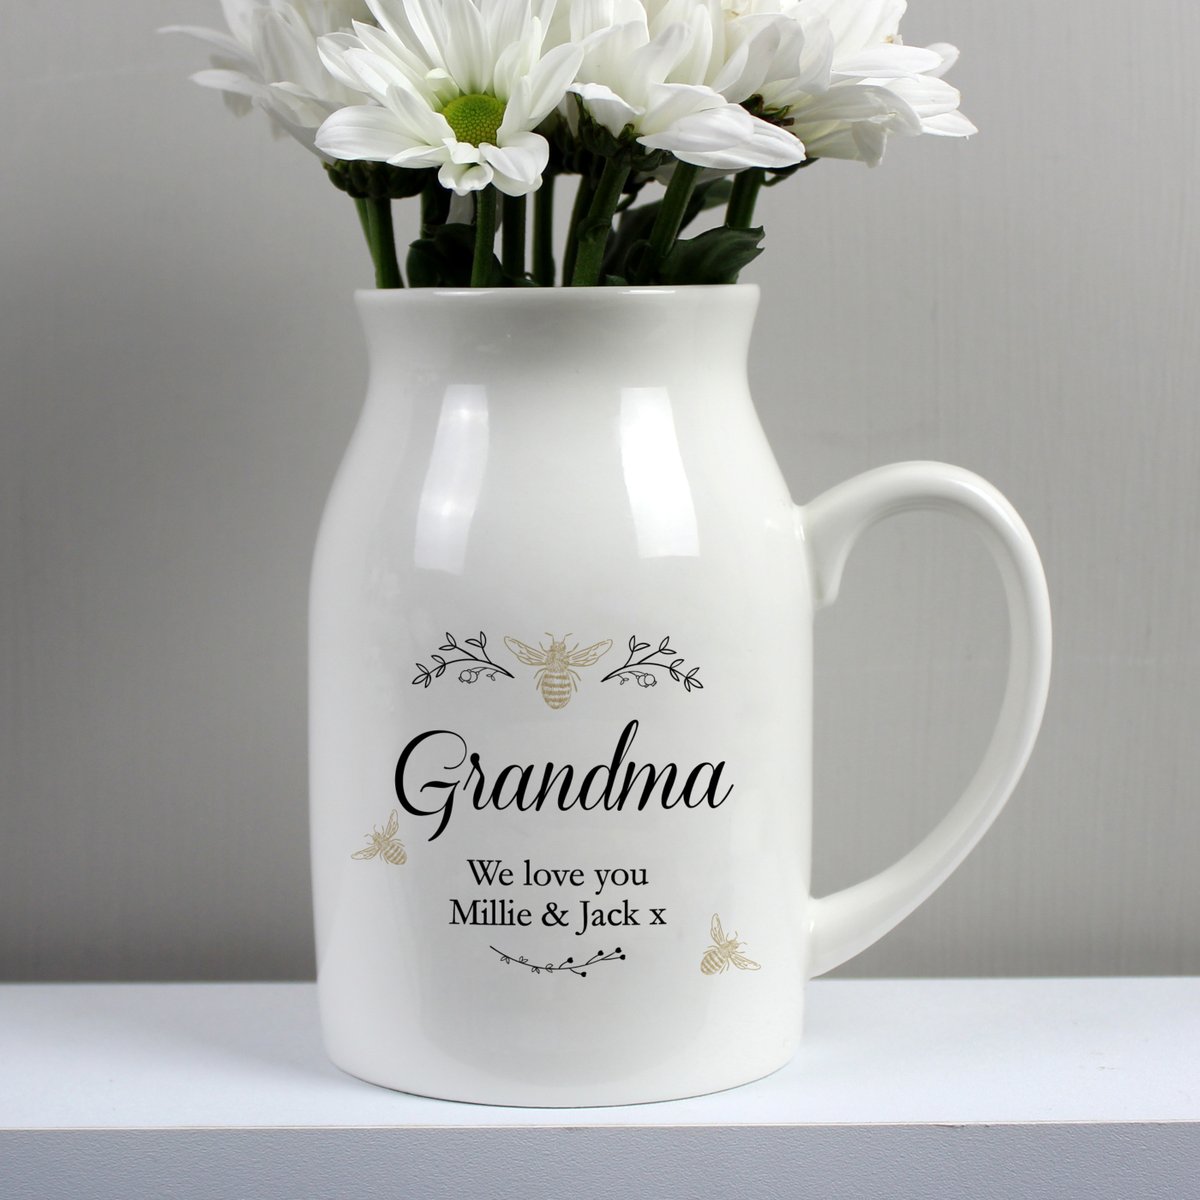 A pretty way to display flowers, this jug vase can be personalised with any name and message lilyblueuk.co.uk/personalised-b…

#vase #countrykitchen #giftideas #personalised #shopindie #jug #EarlyBiz